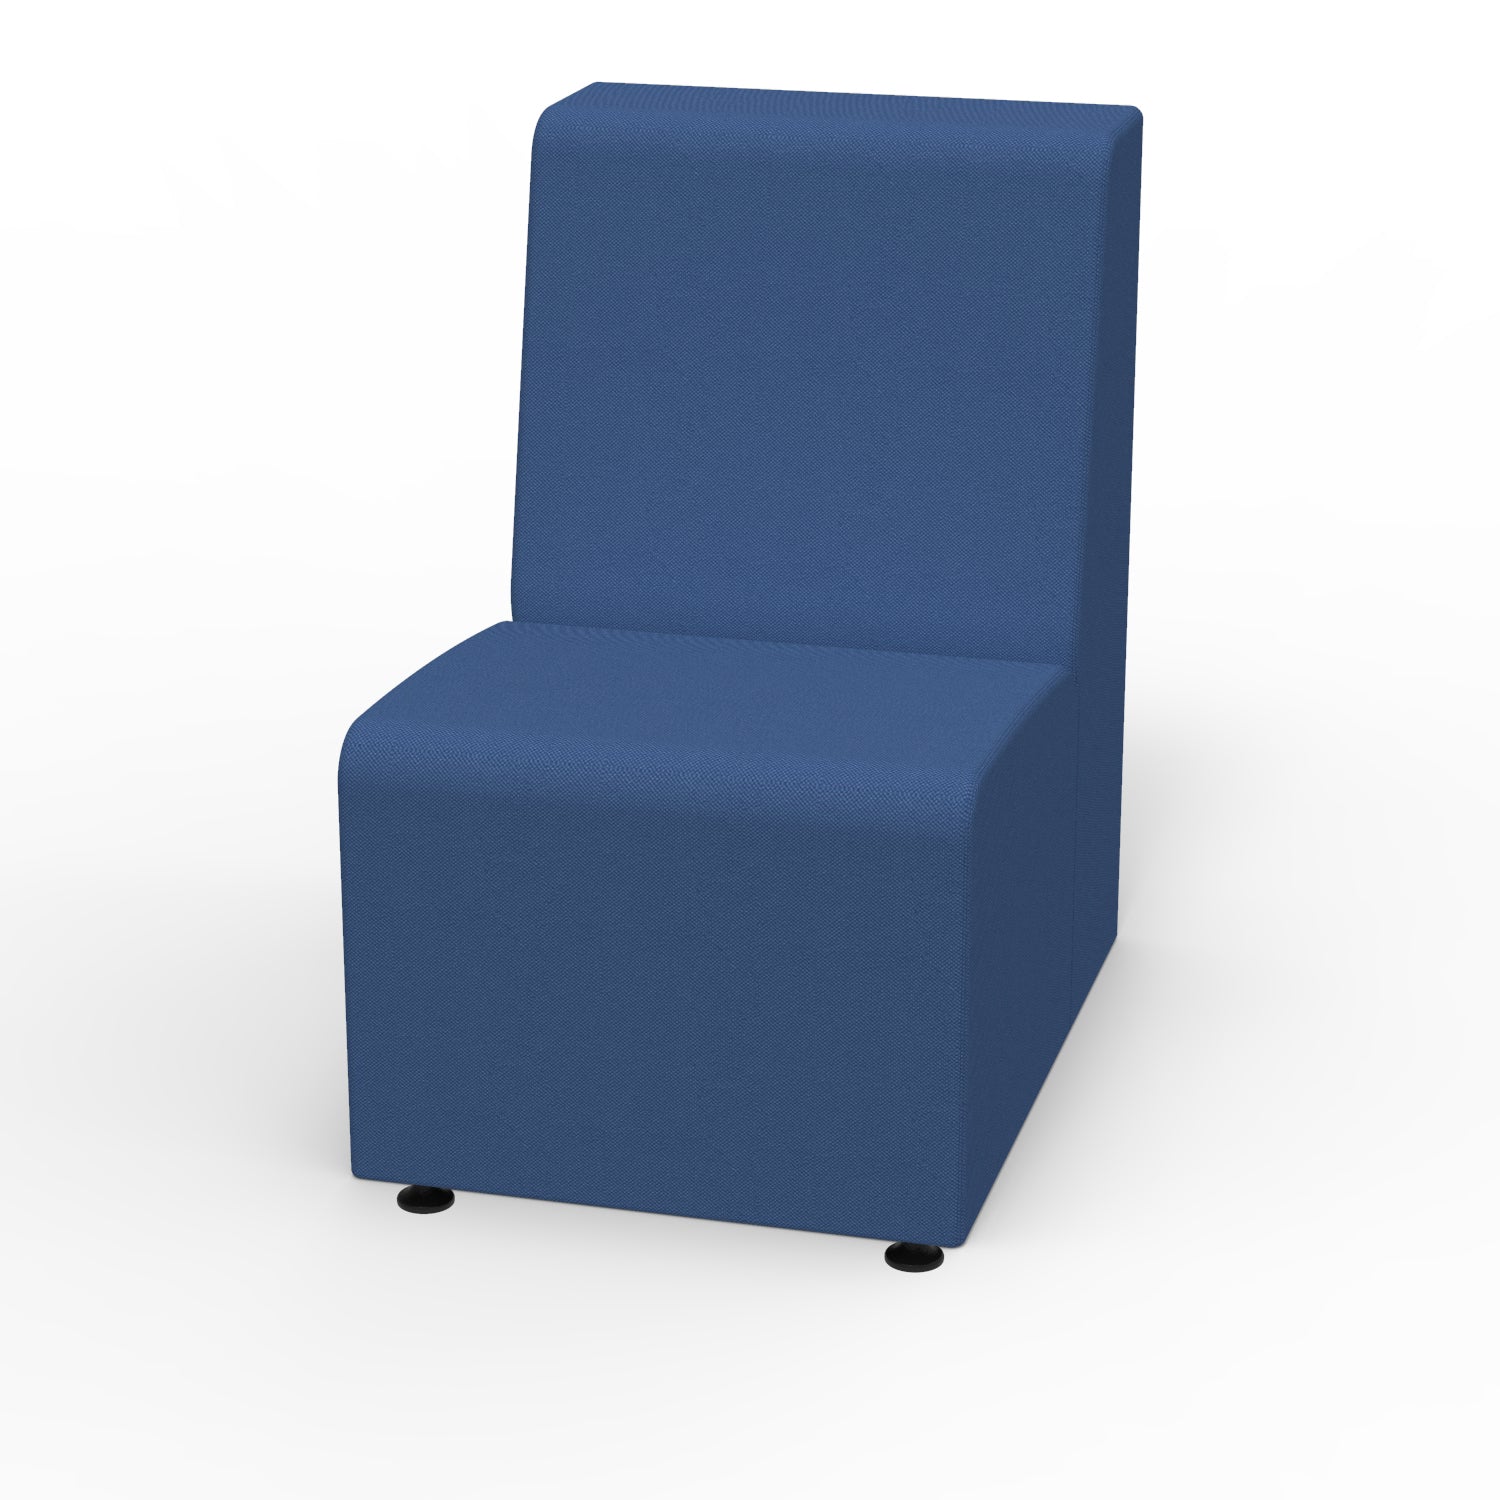 Sonik Soft Seating Single Chair, 18" Seat Height